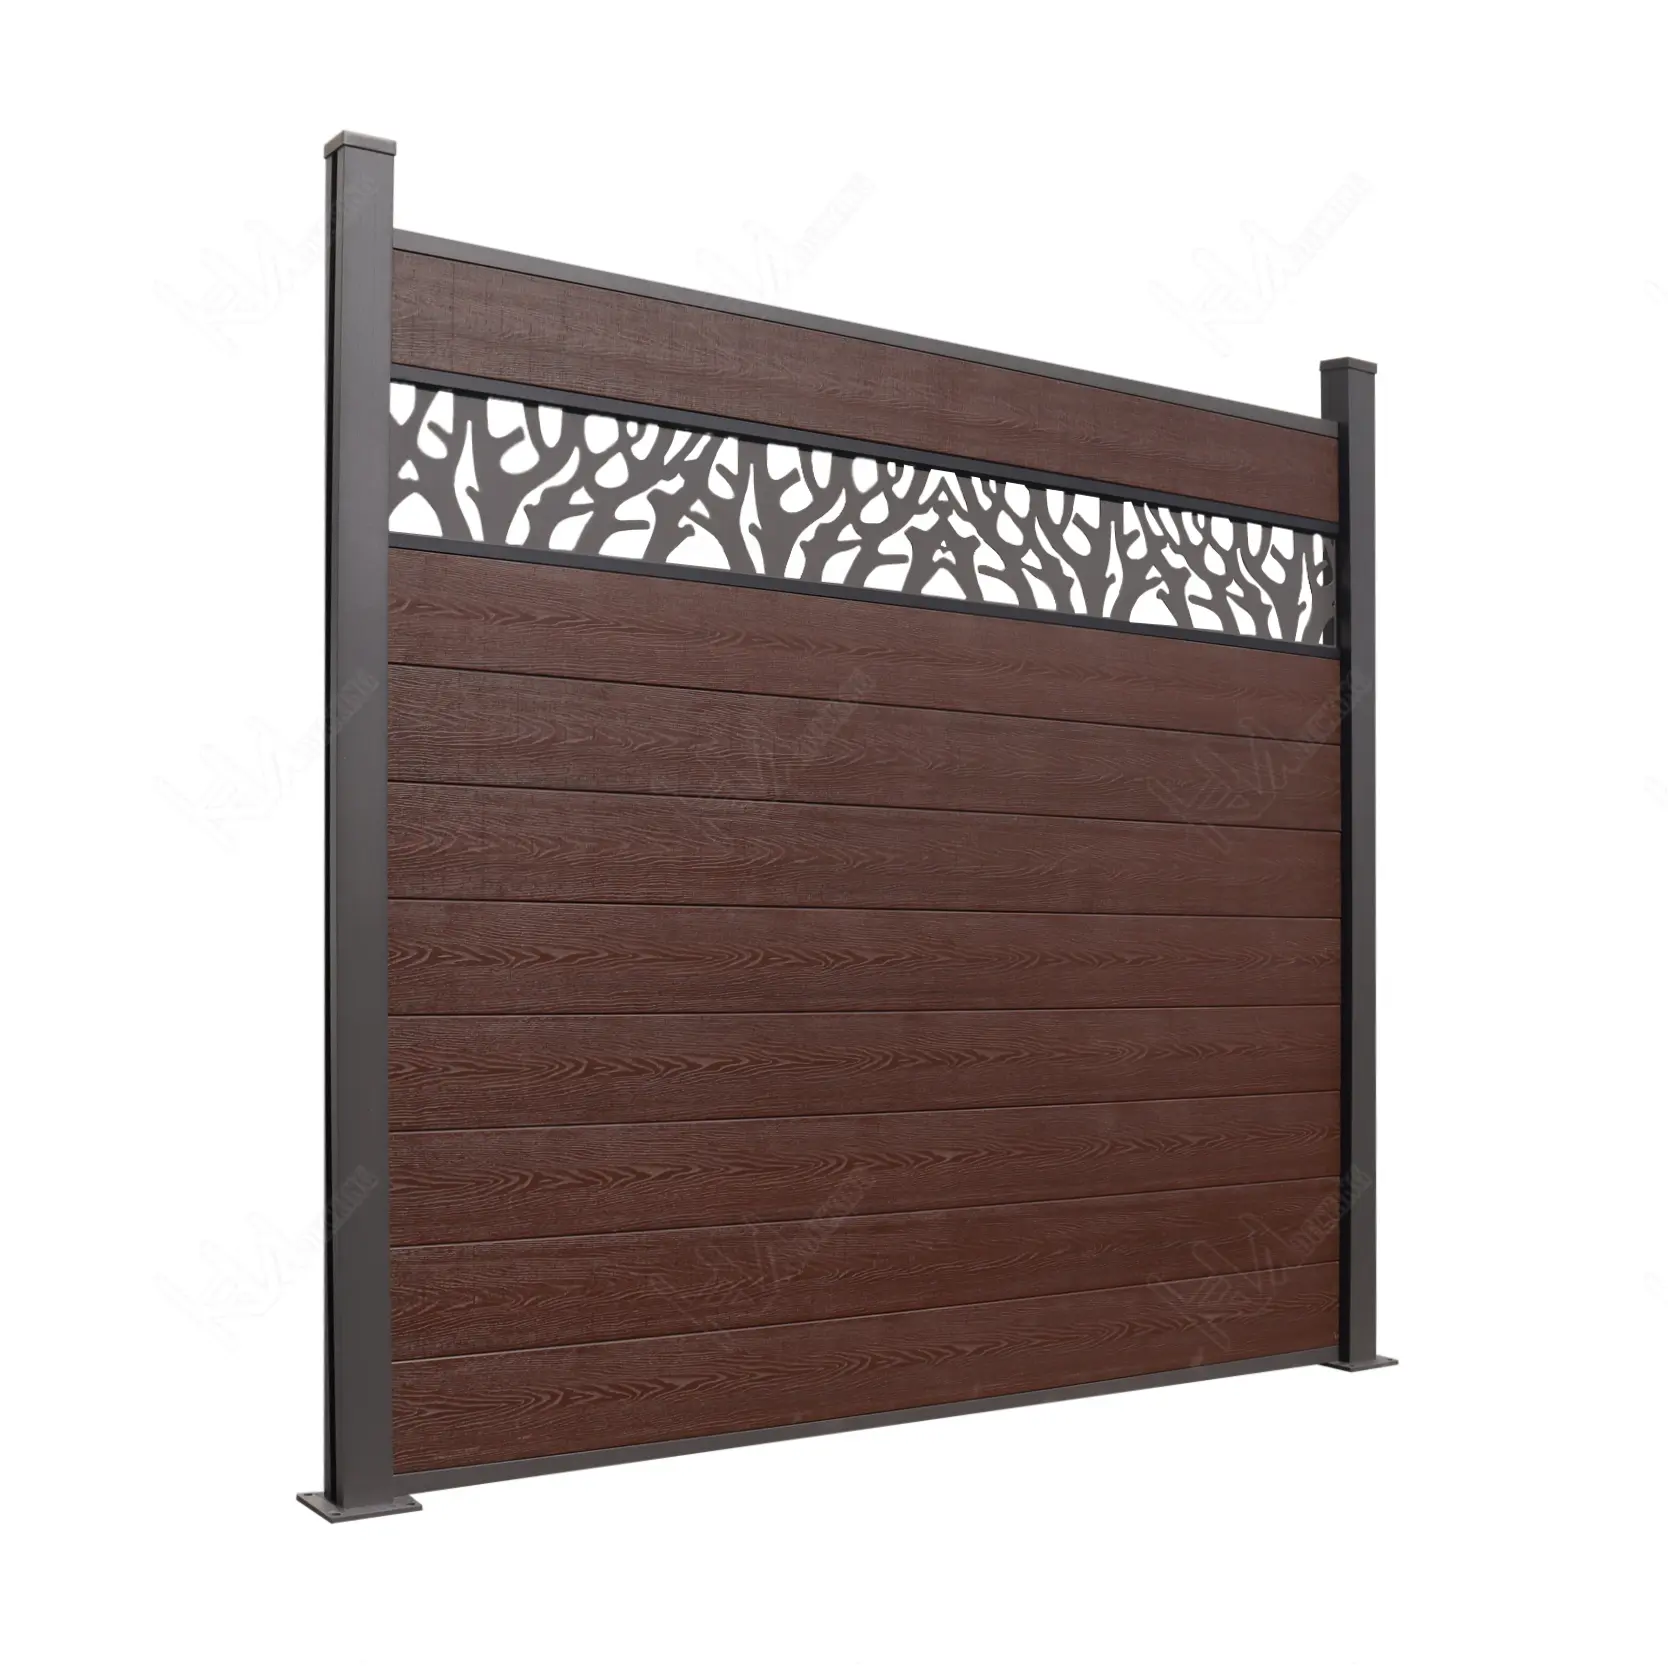 Luxurious Outdoor Co-extrusion WPC Fencing Composite Decorative Euro Fence Panels with Carving